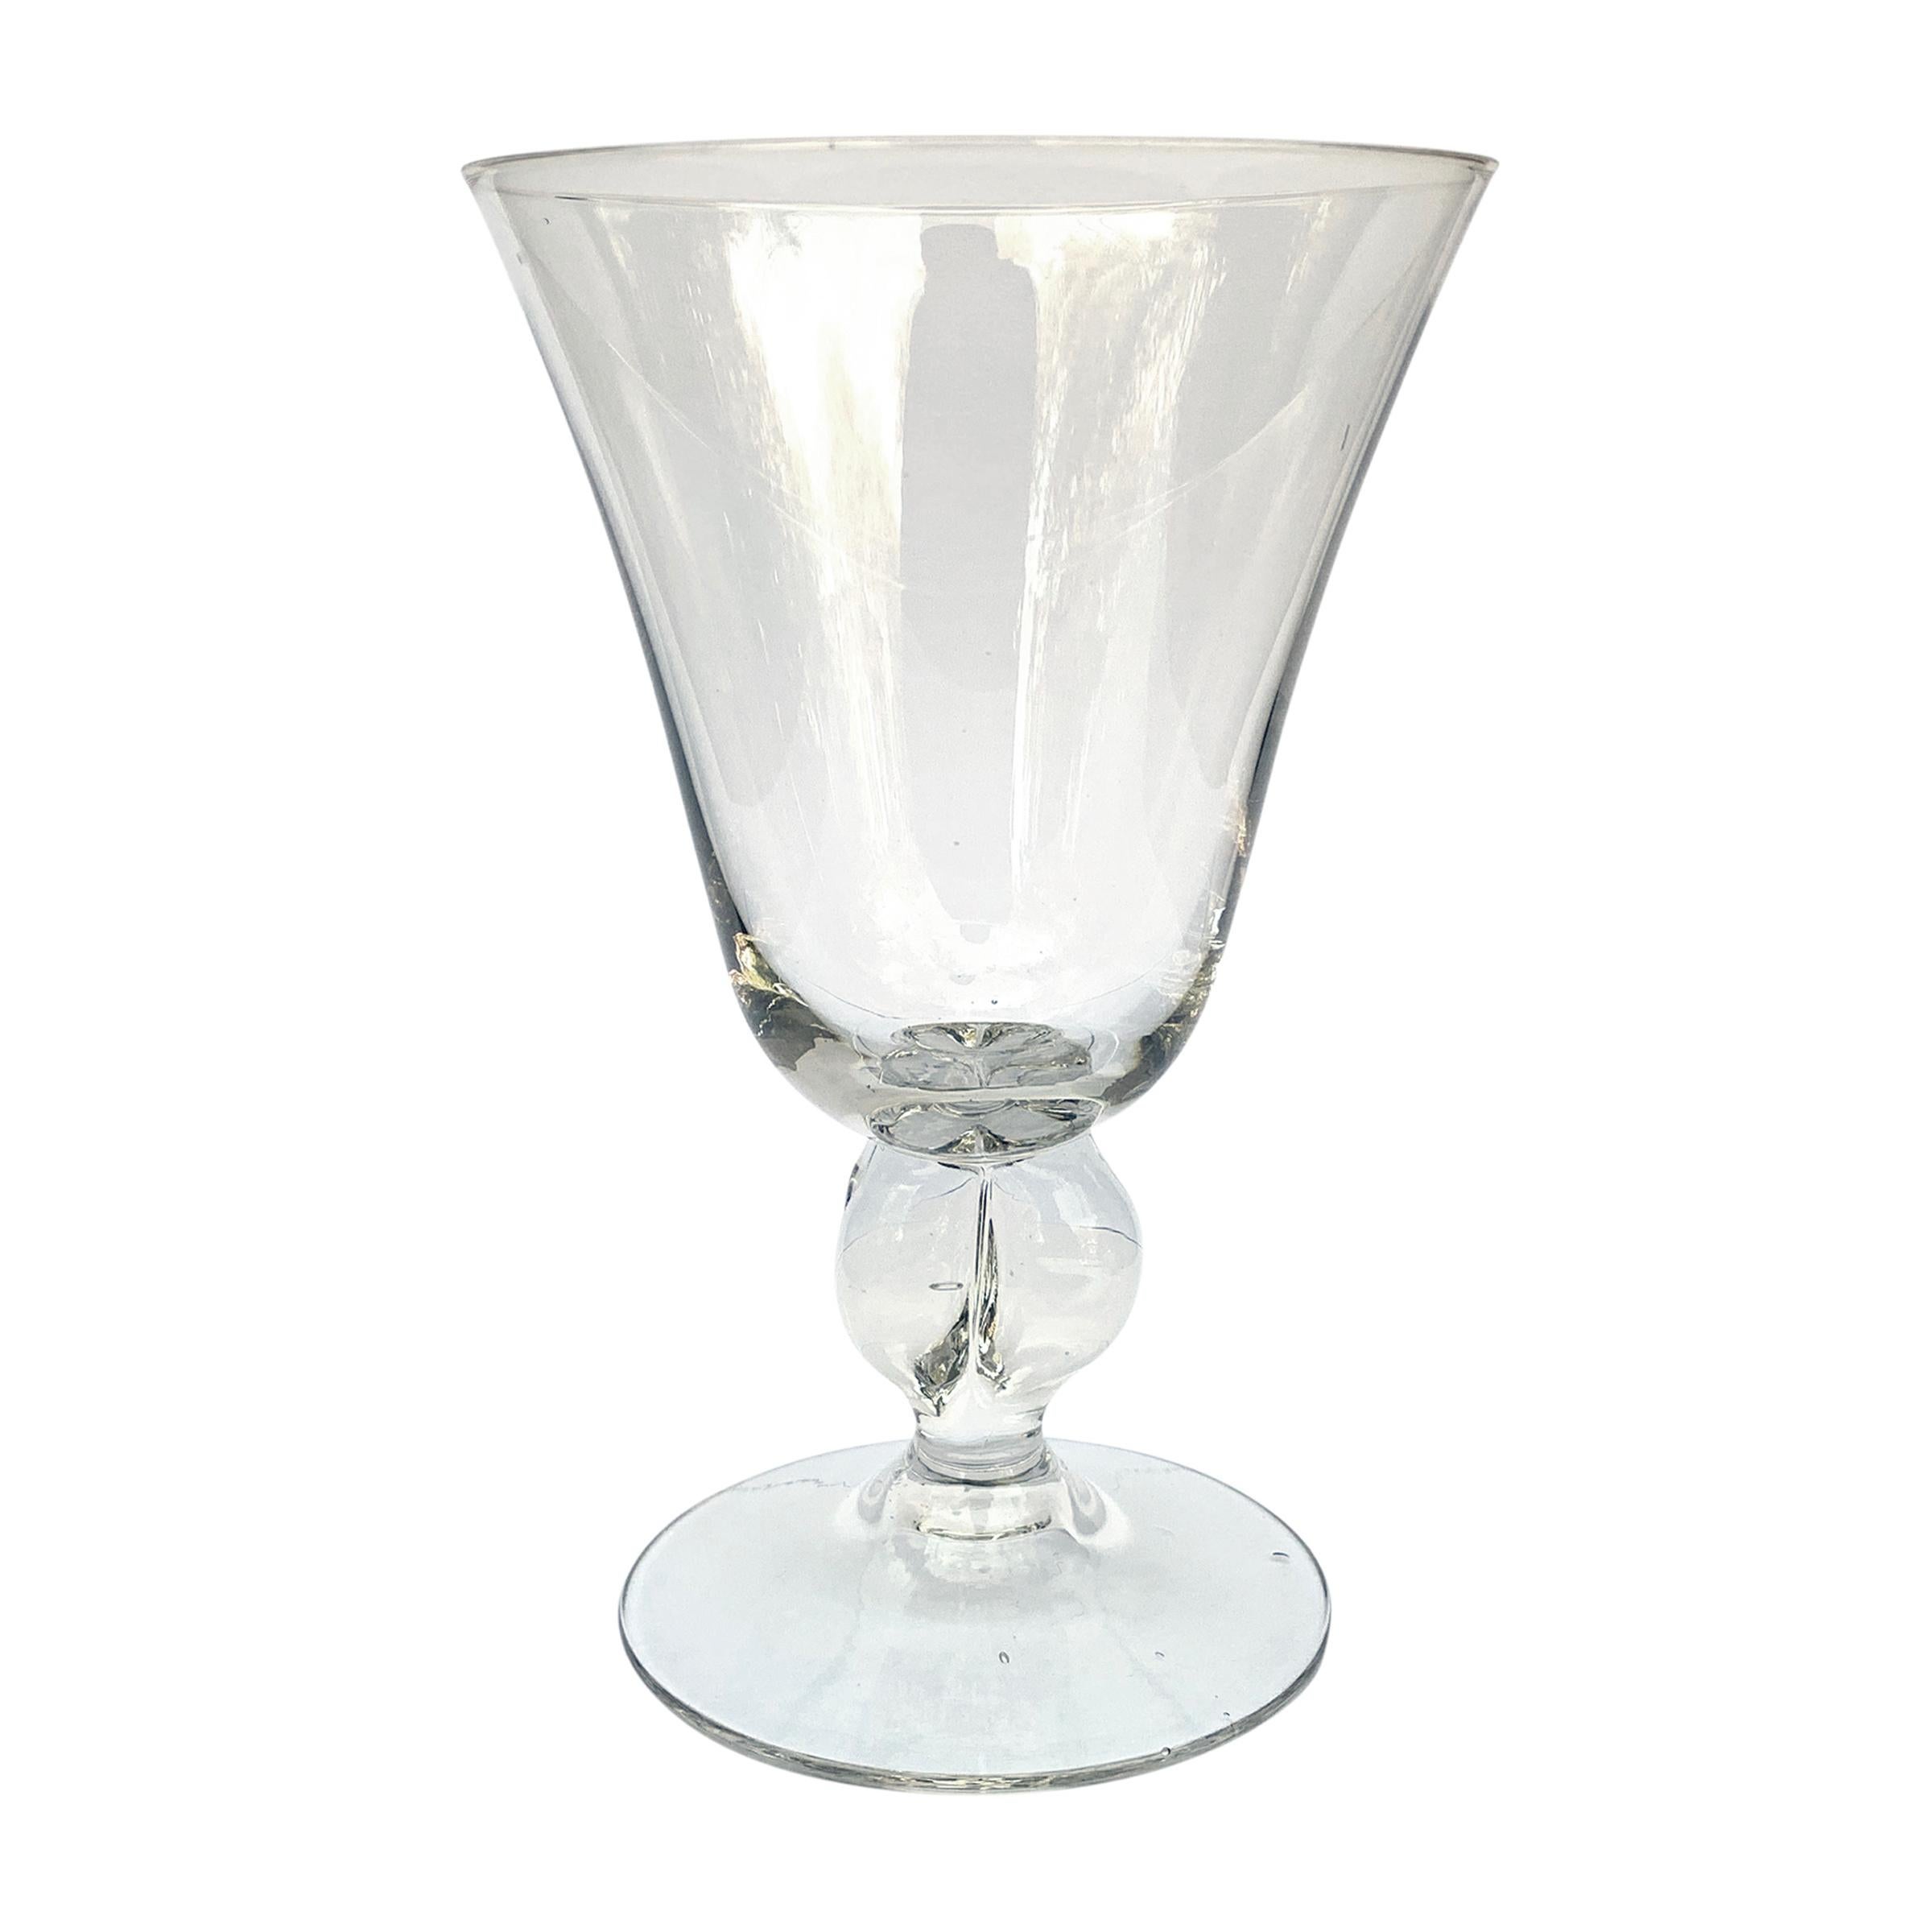 A set of six chic early 20th century Swedish hand blown crystal wine glasses with bell-curved bowls resting on quatrefoil stems. The walls of the bowls are thin showing a high degree of skill in their creation.